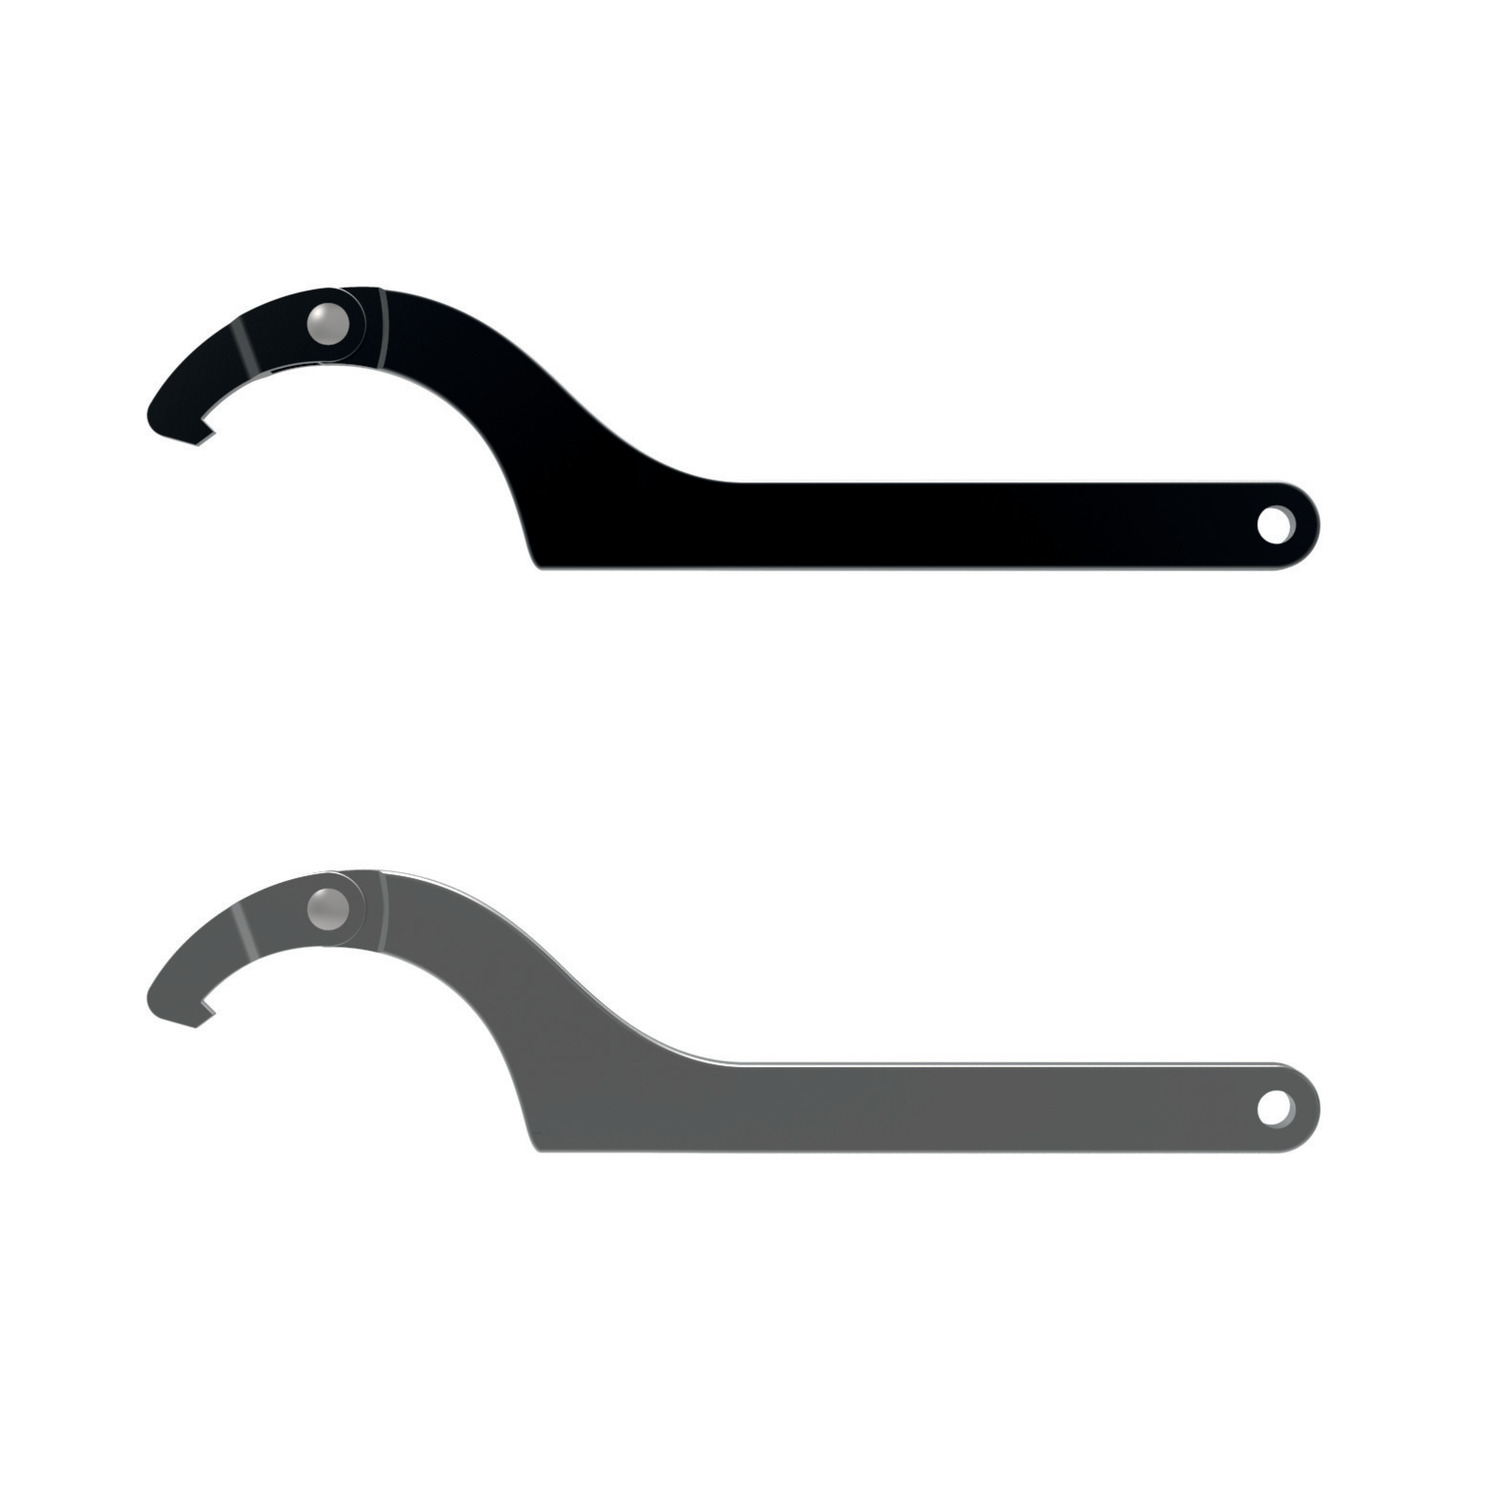 95110 - Hook Spanners - with Hook Nose